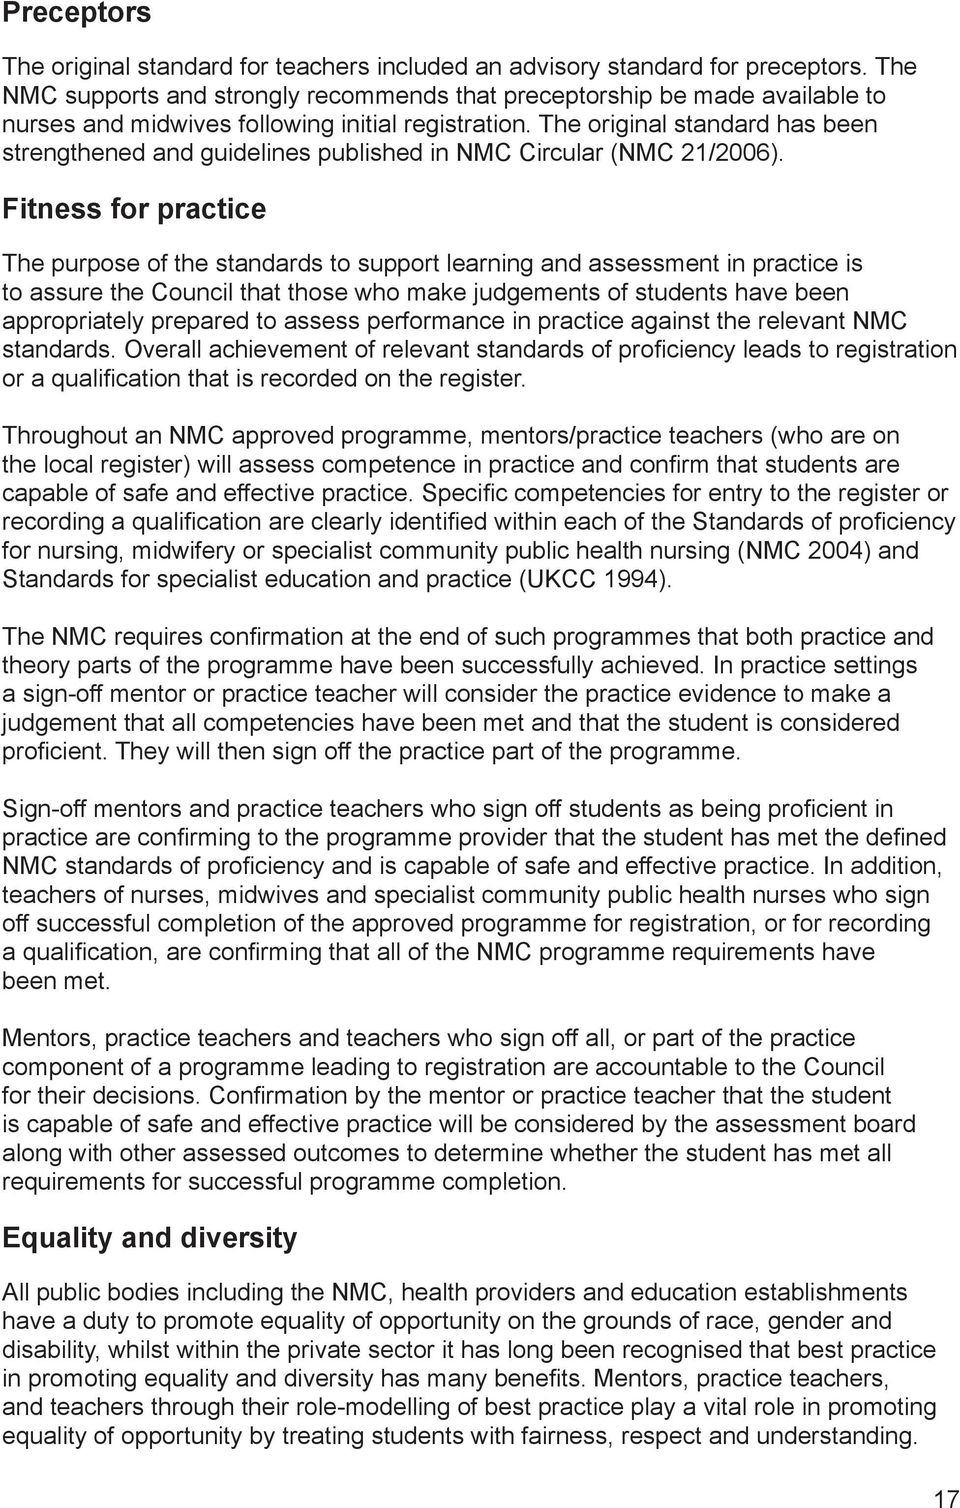 The original standard has been strengthened and guidelines published in NMC Circular (NMC 21/2006).